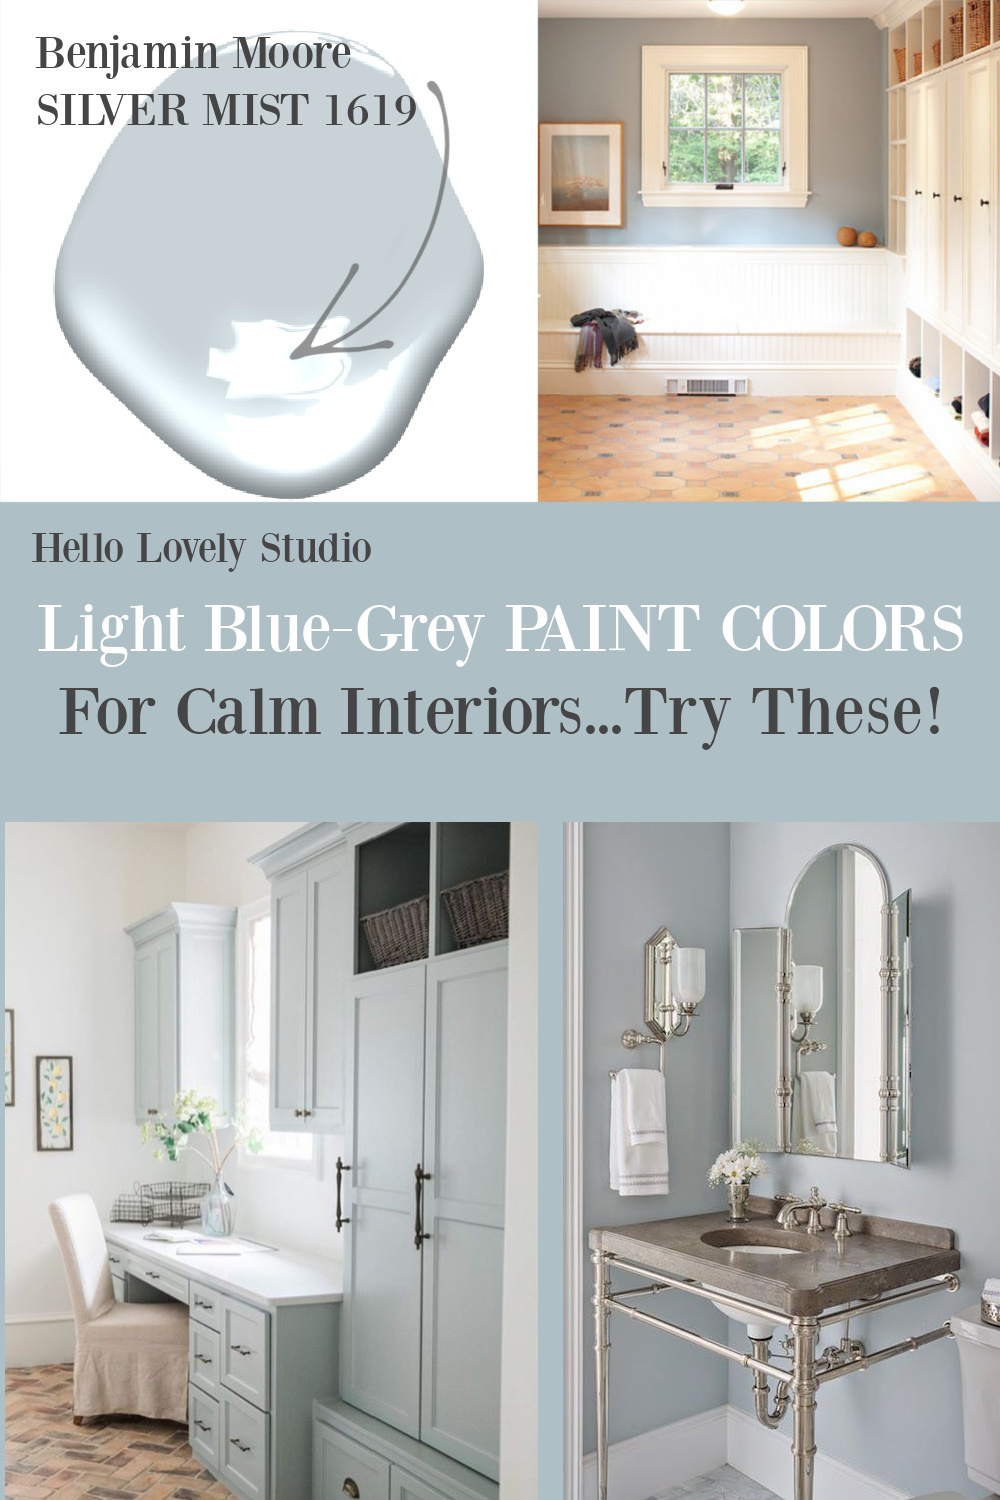 Light grey paint colors for calm interiors - try these on Hello Lovely! #paintcolors #bluegray #greyblue #greypaintcolors